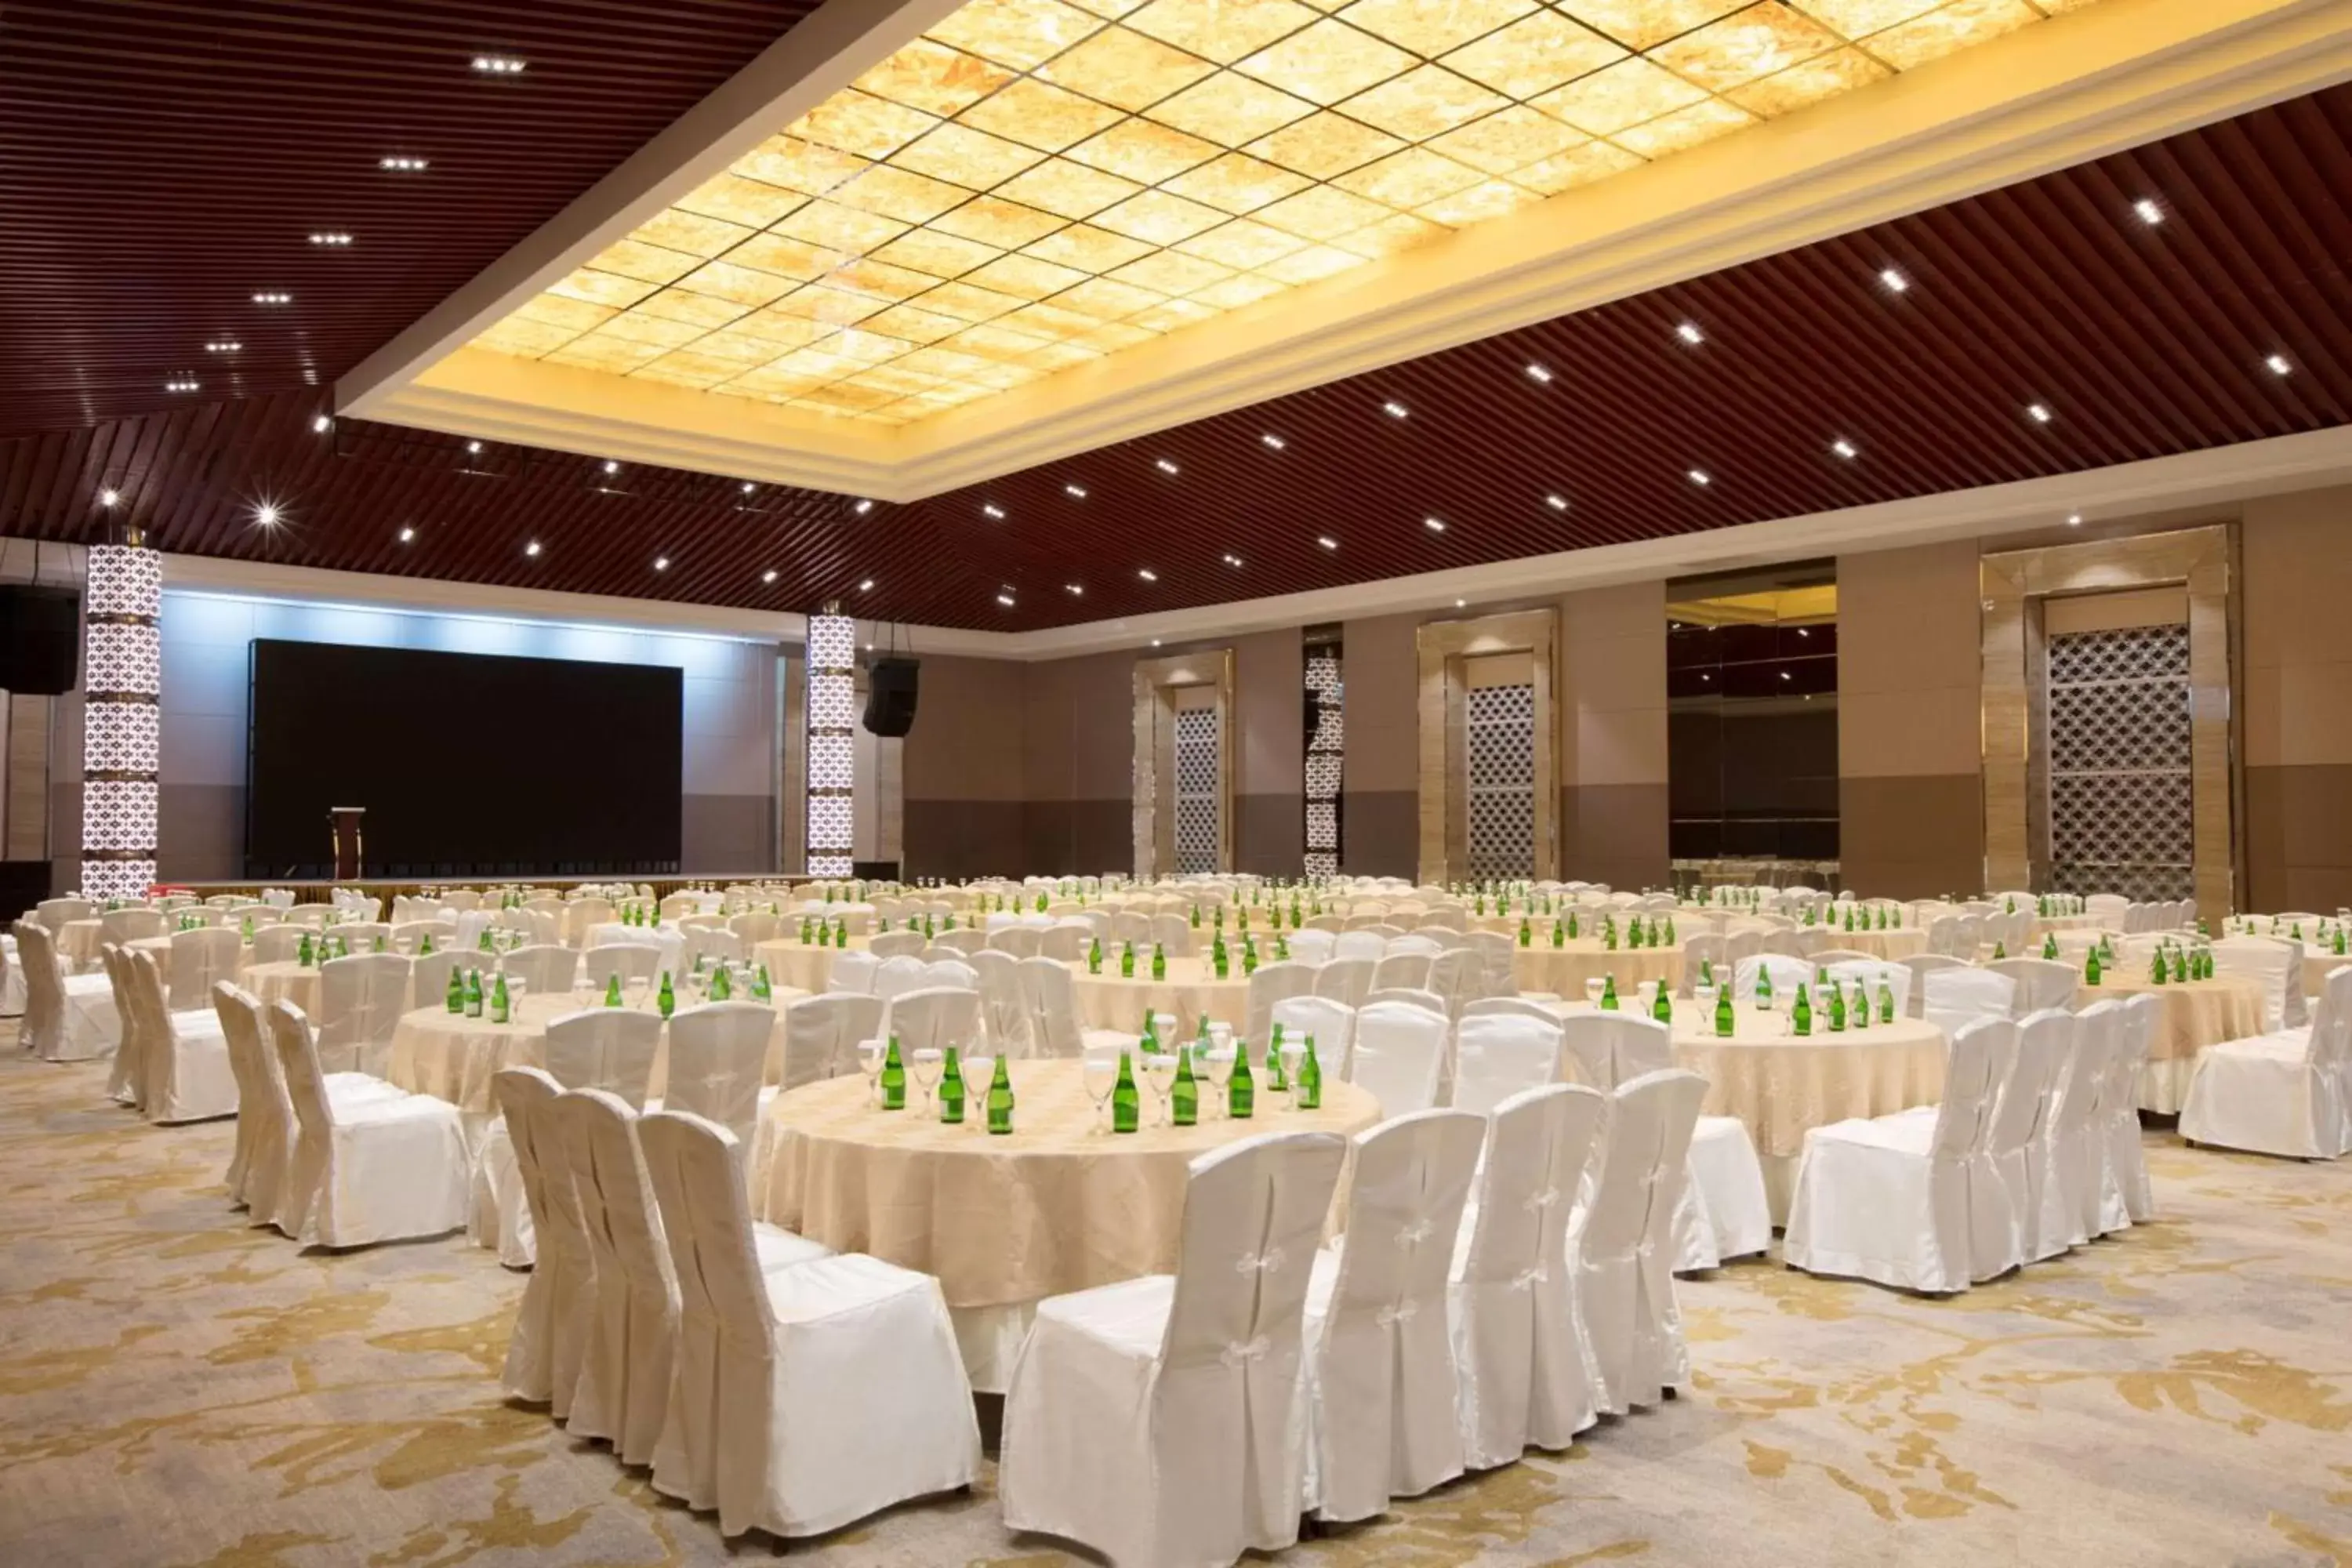 Banquet/Function facilities, Banquet Facilities in Best Western Premier Panbil